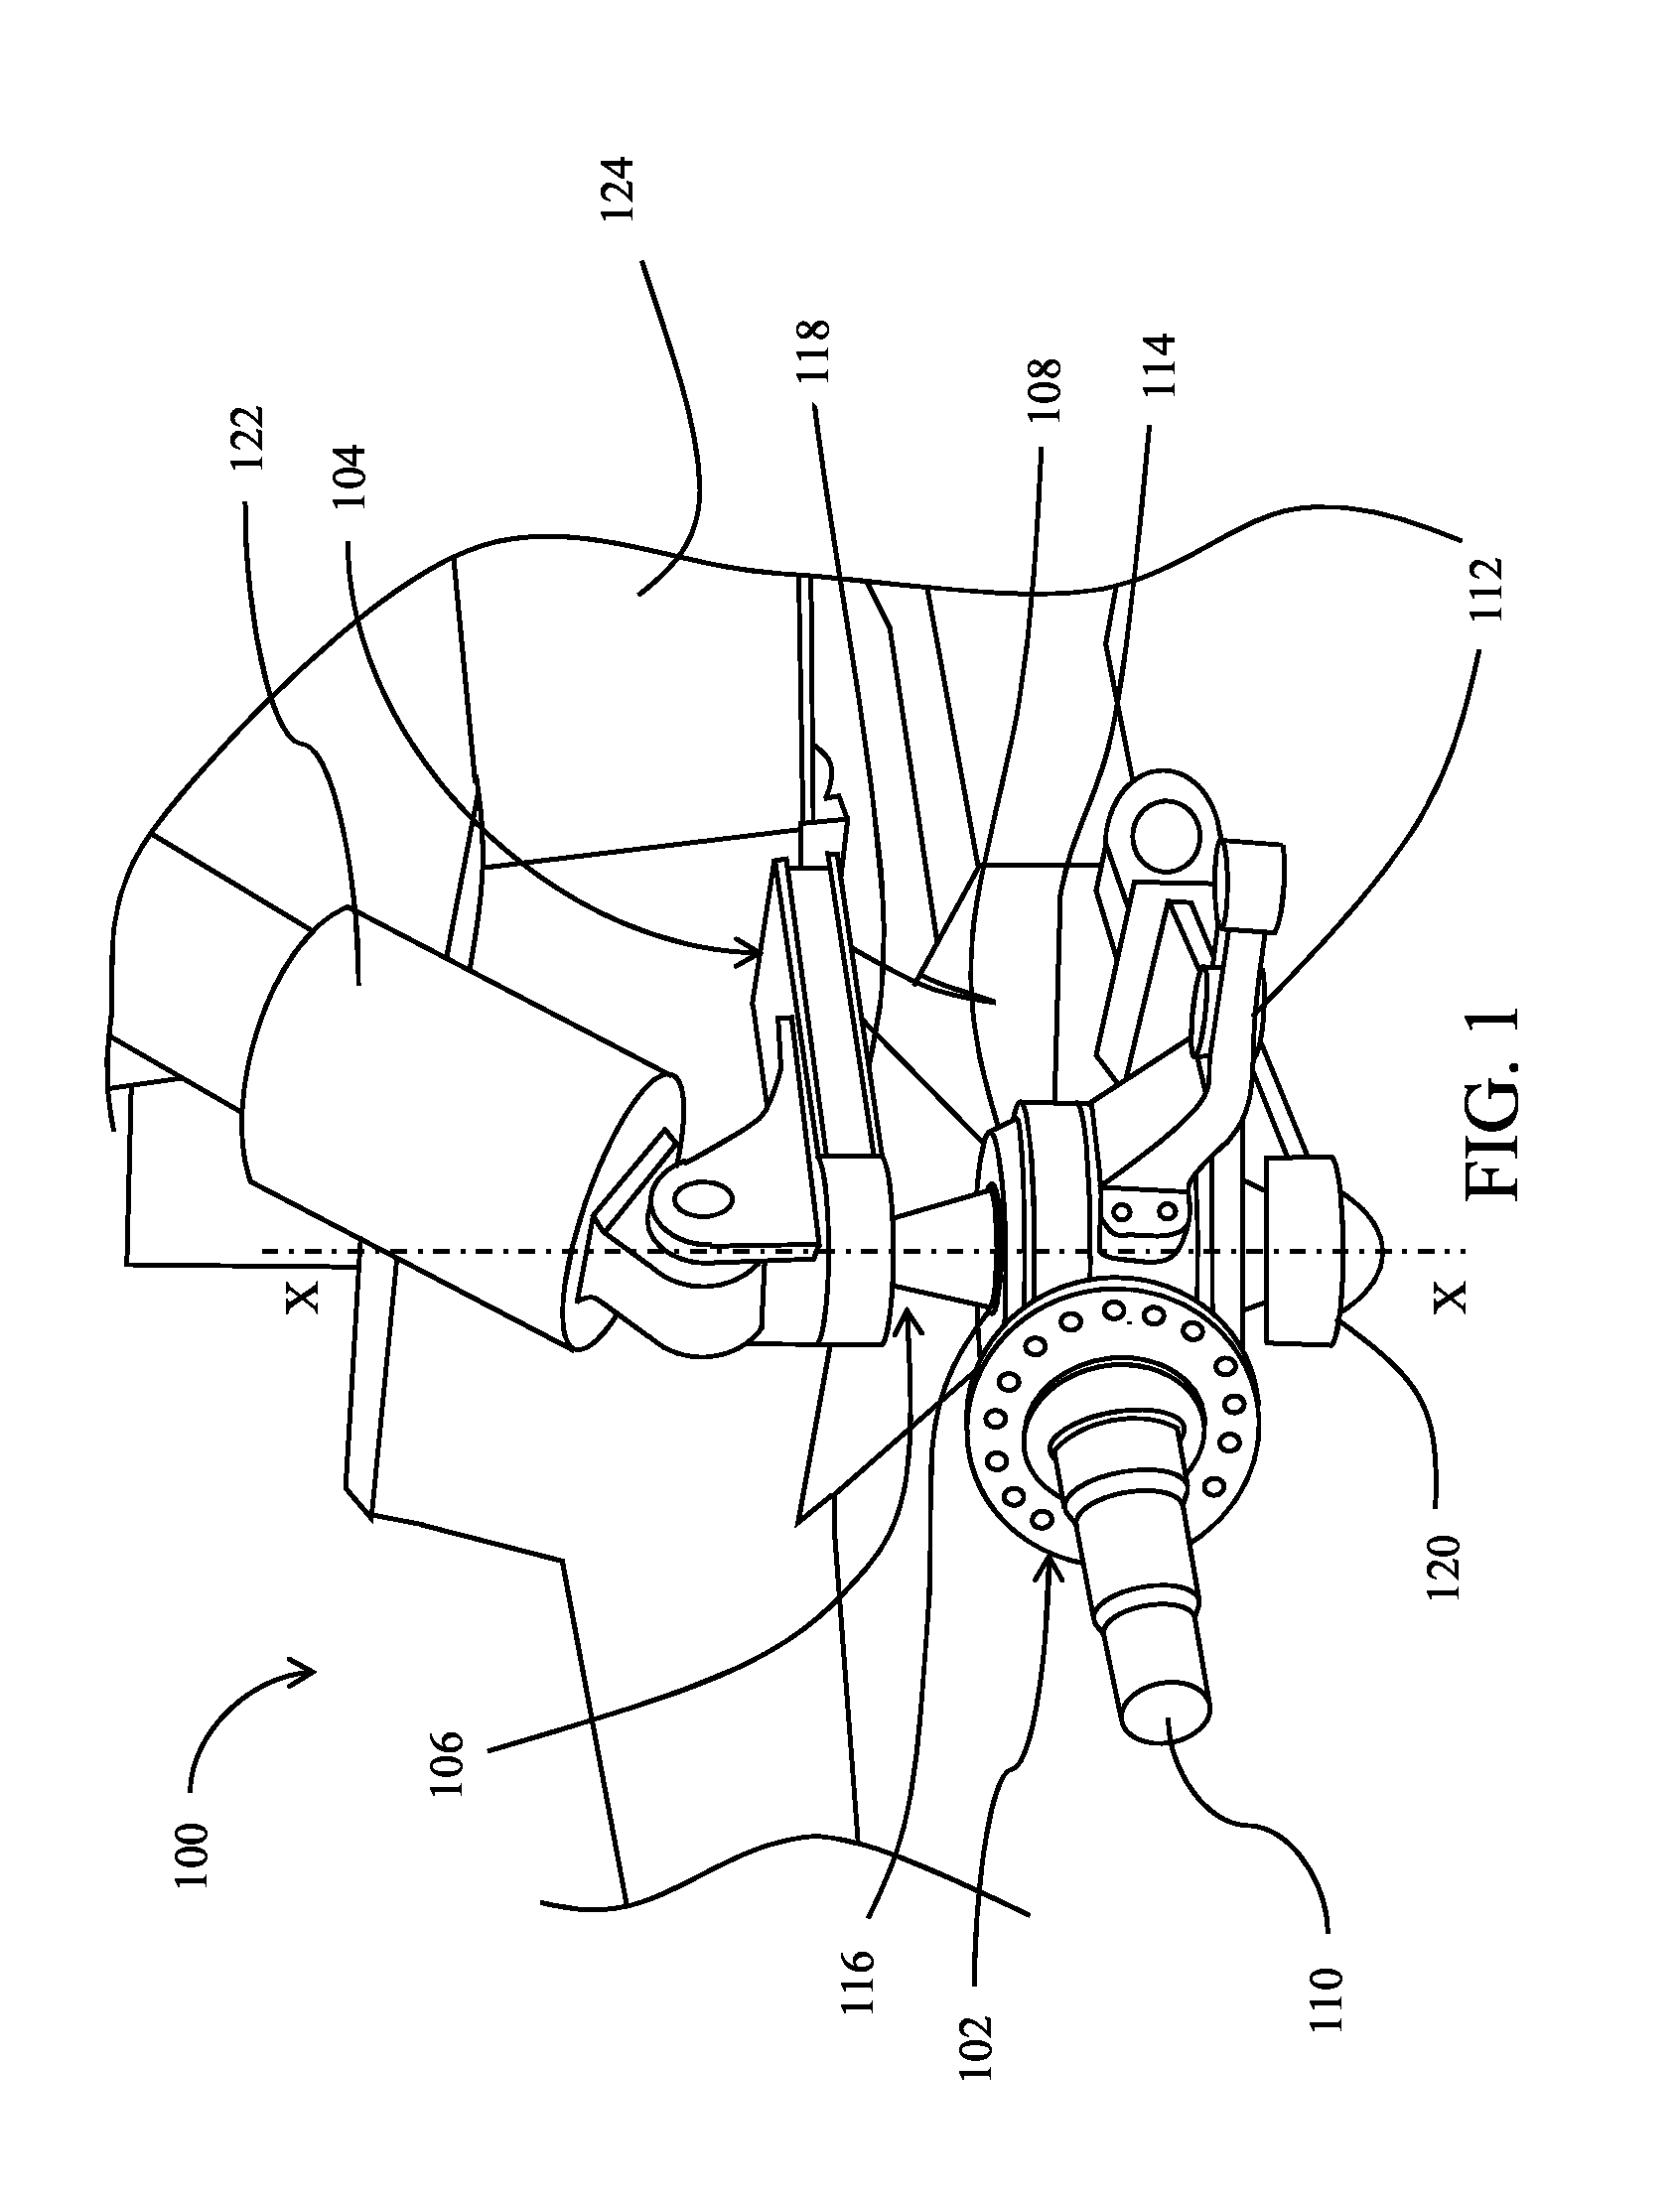 Kingpin assembly for steering and suspension linkage assembly